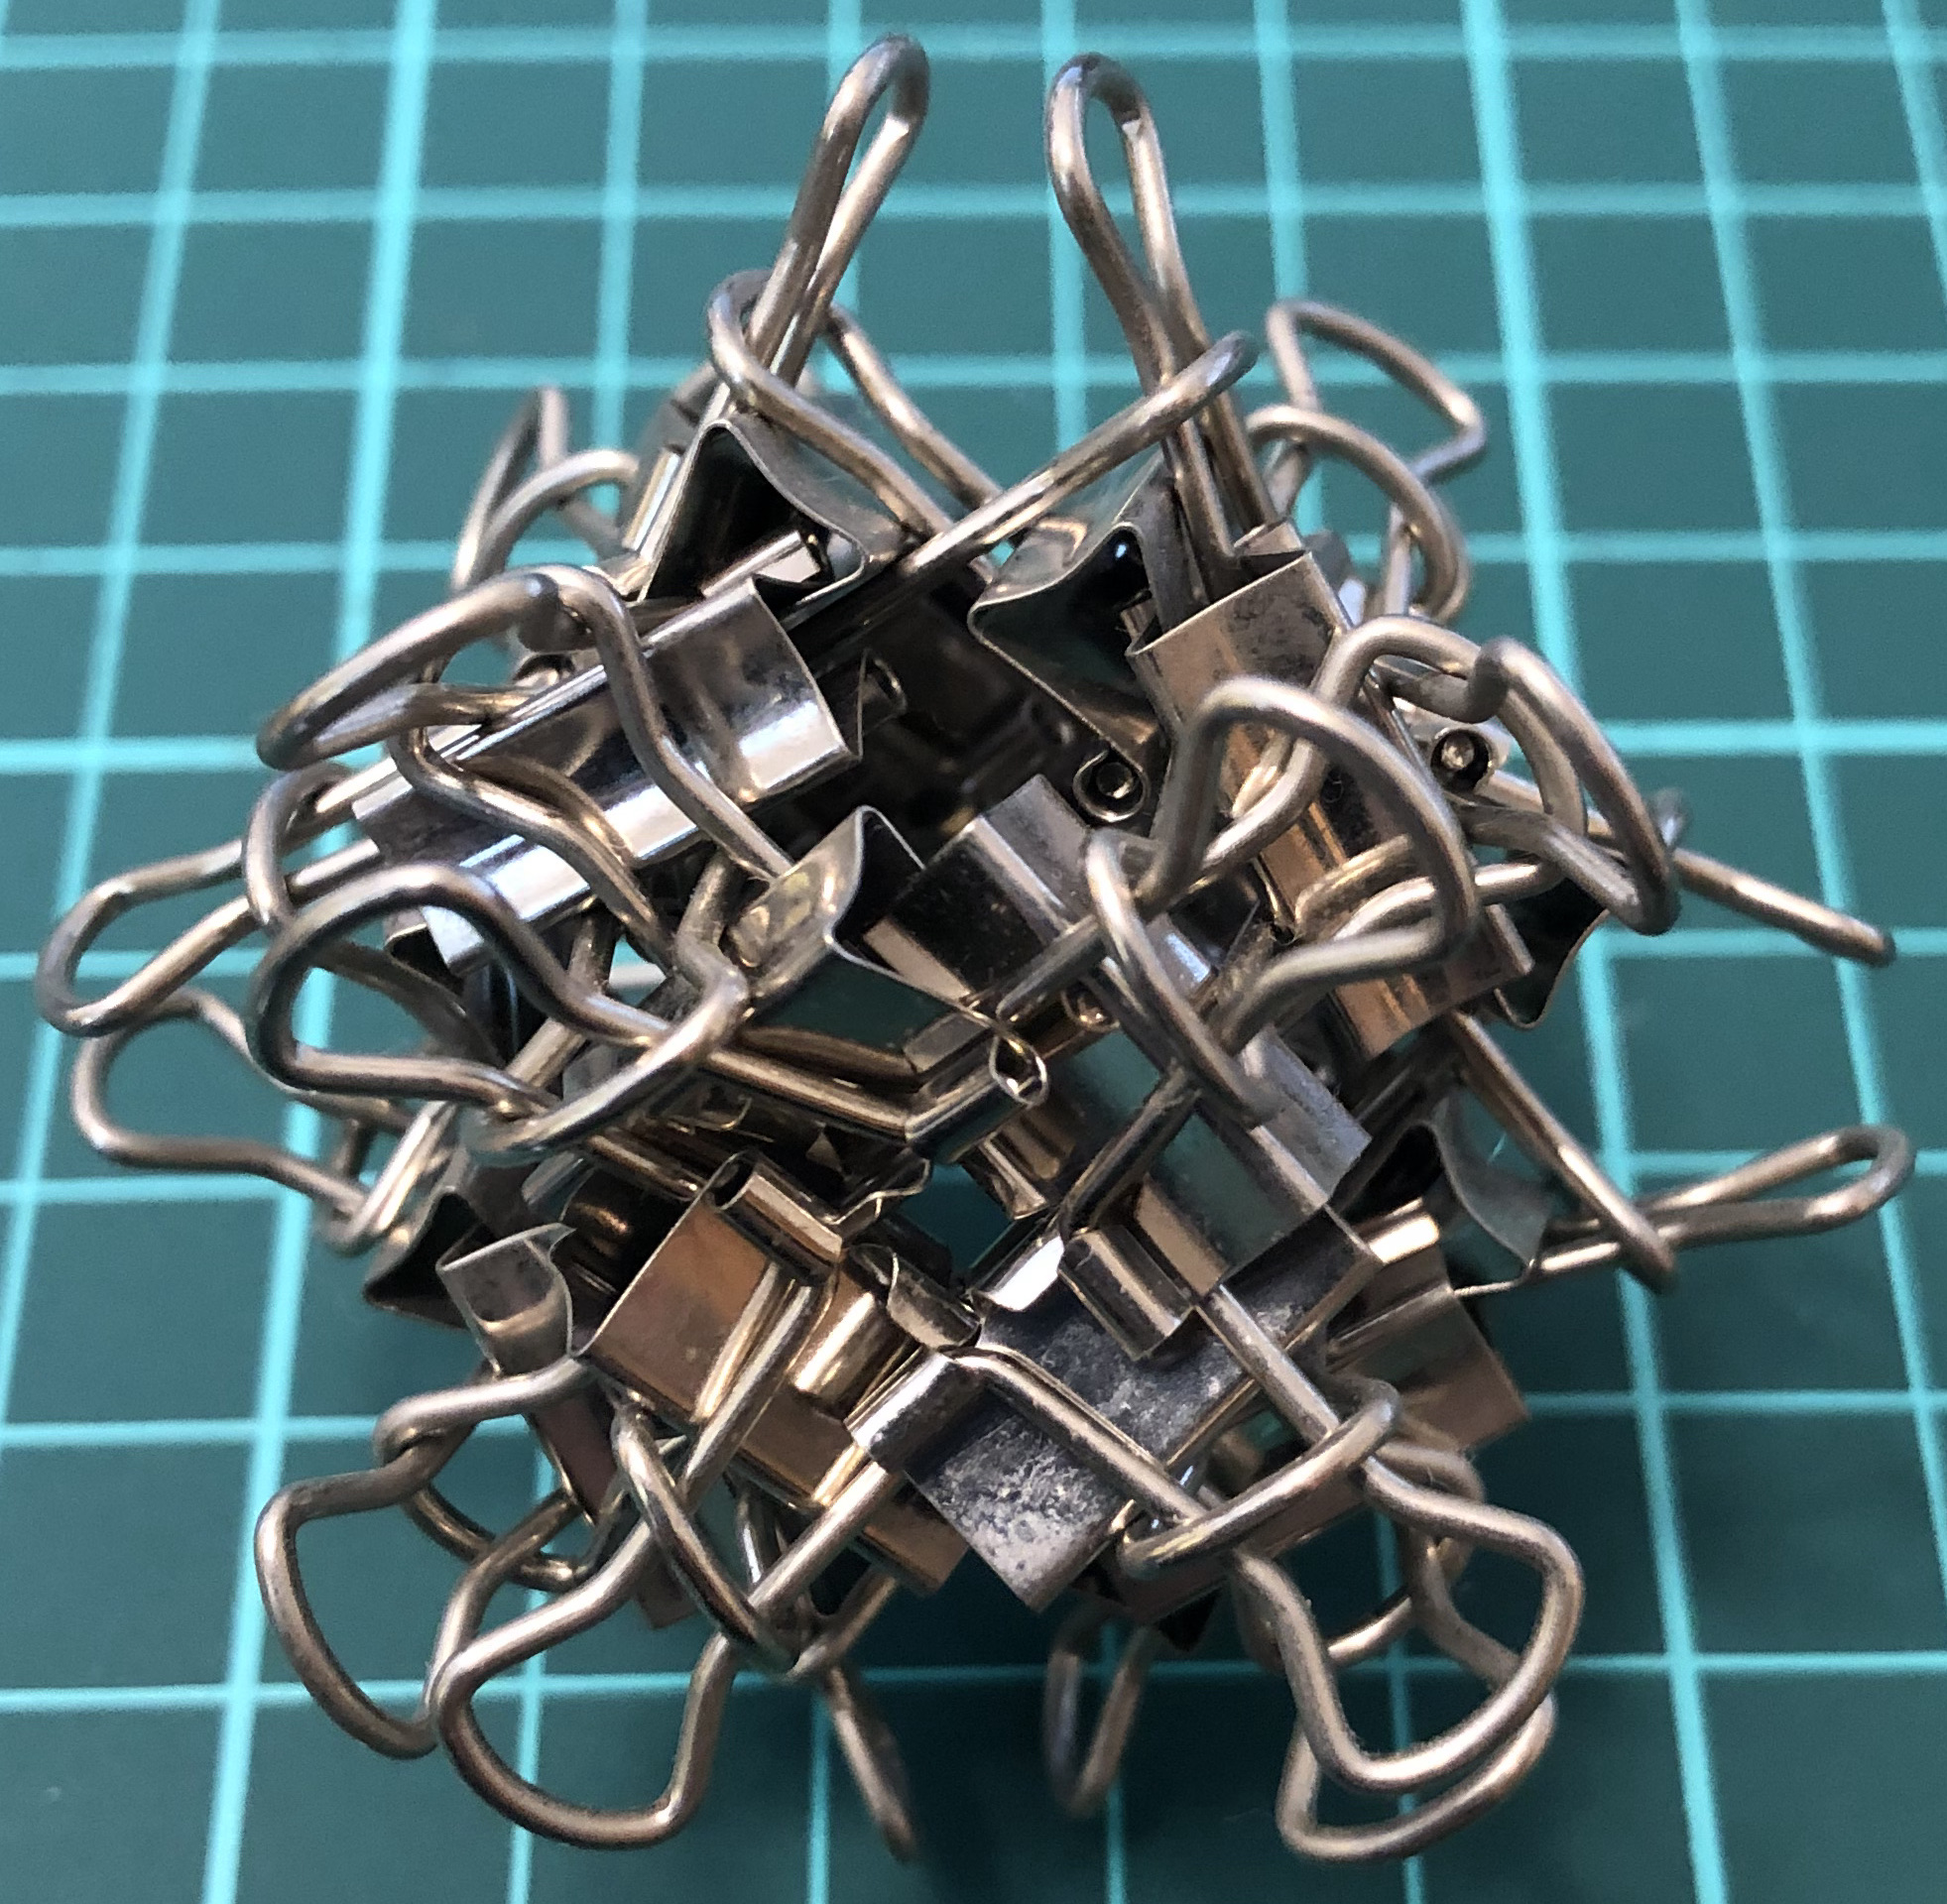 24 clips forming 12 W-edges forming octahedron